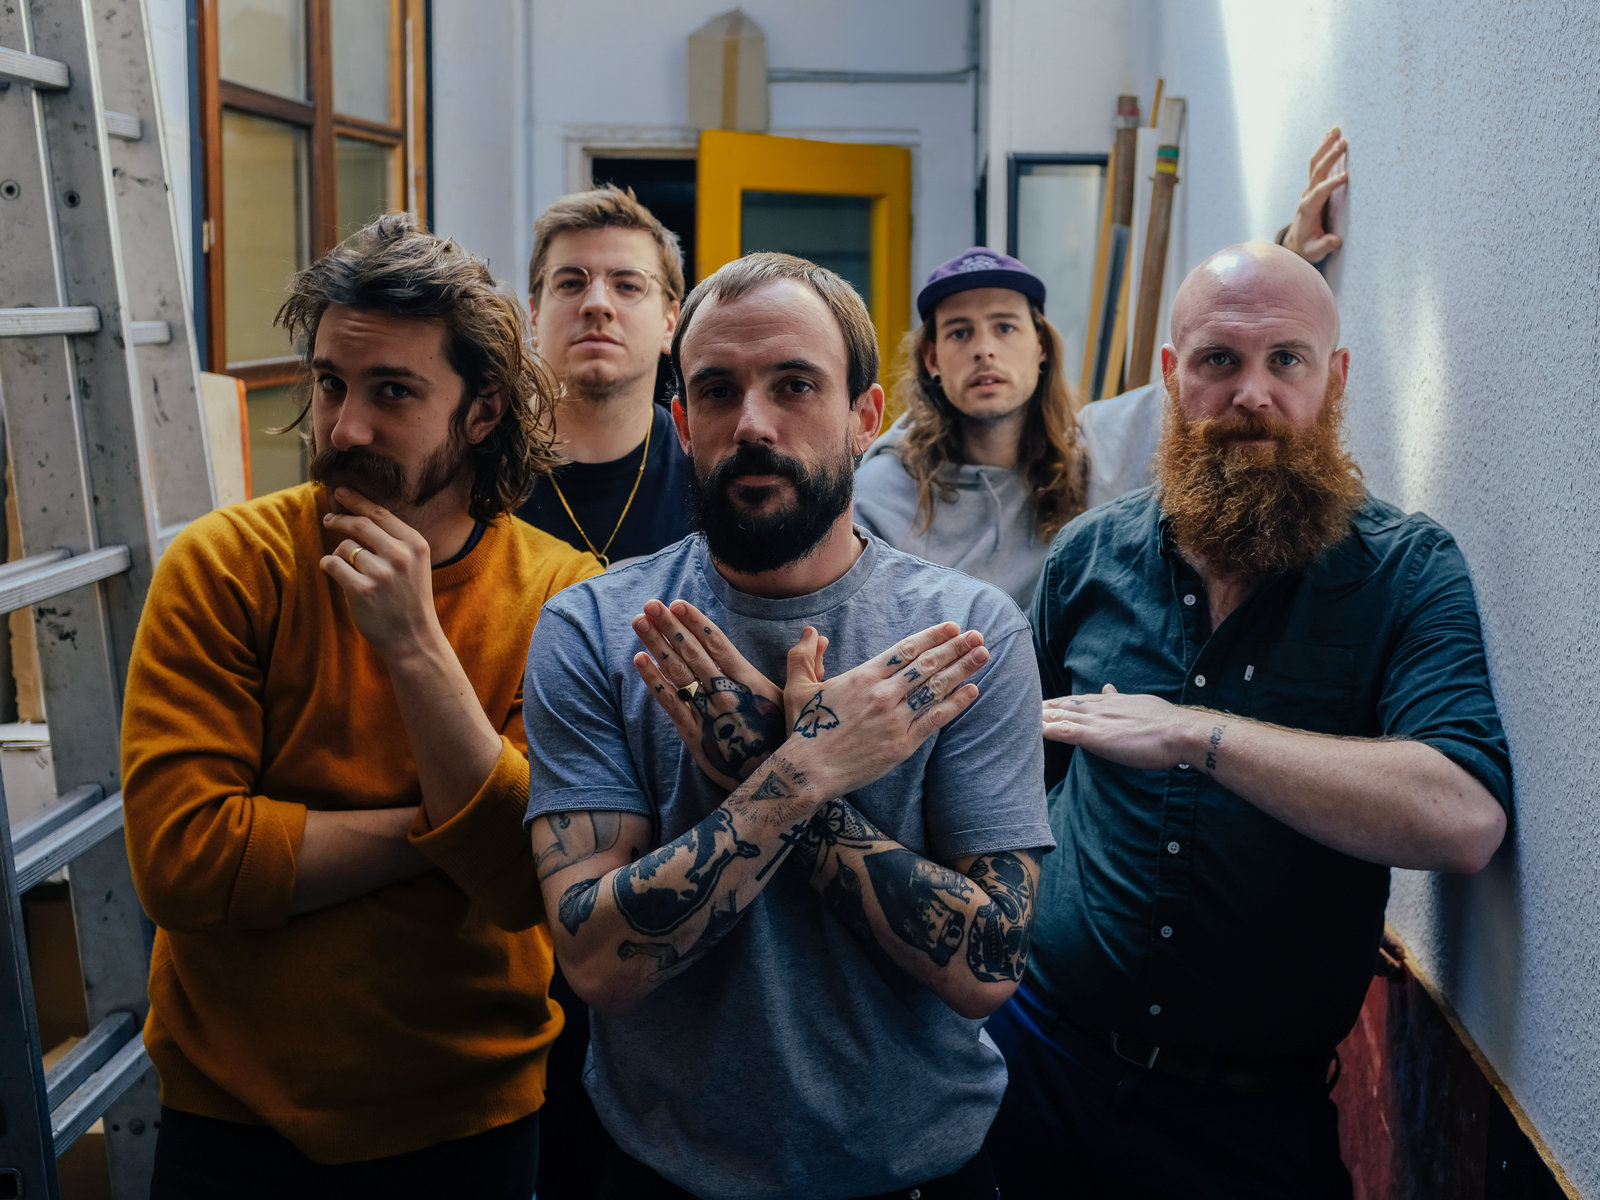 IDLES – WATCH THE VIDEO FOR ‘WAR’ | NEW ALBUM ‘ULTRA MONO’ – OUT NOW